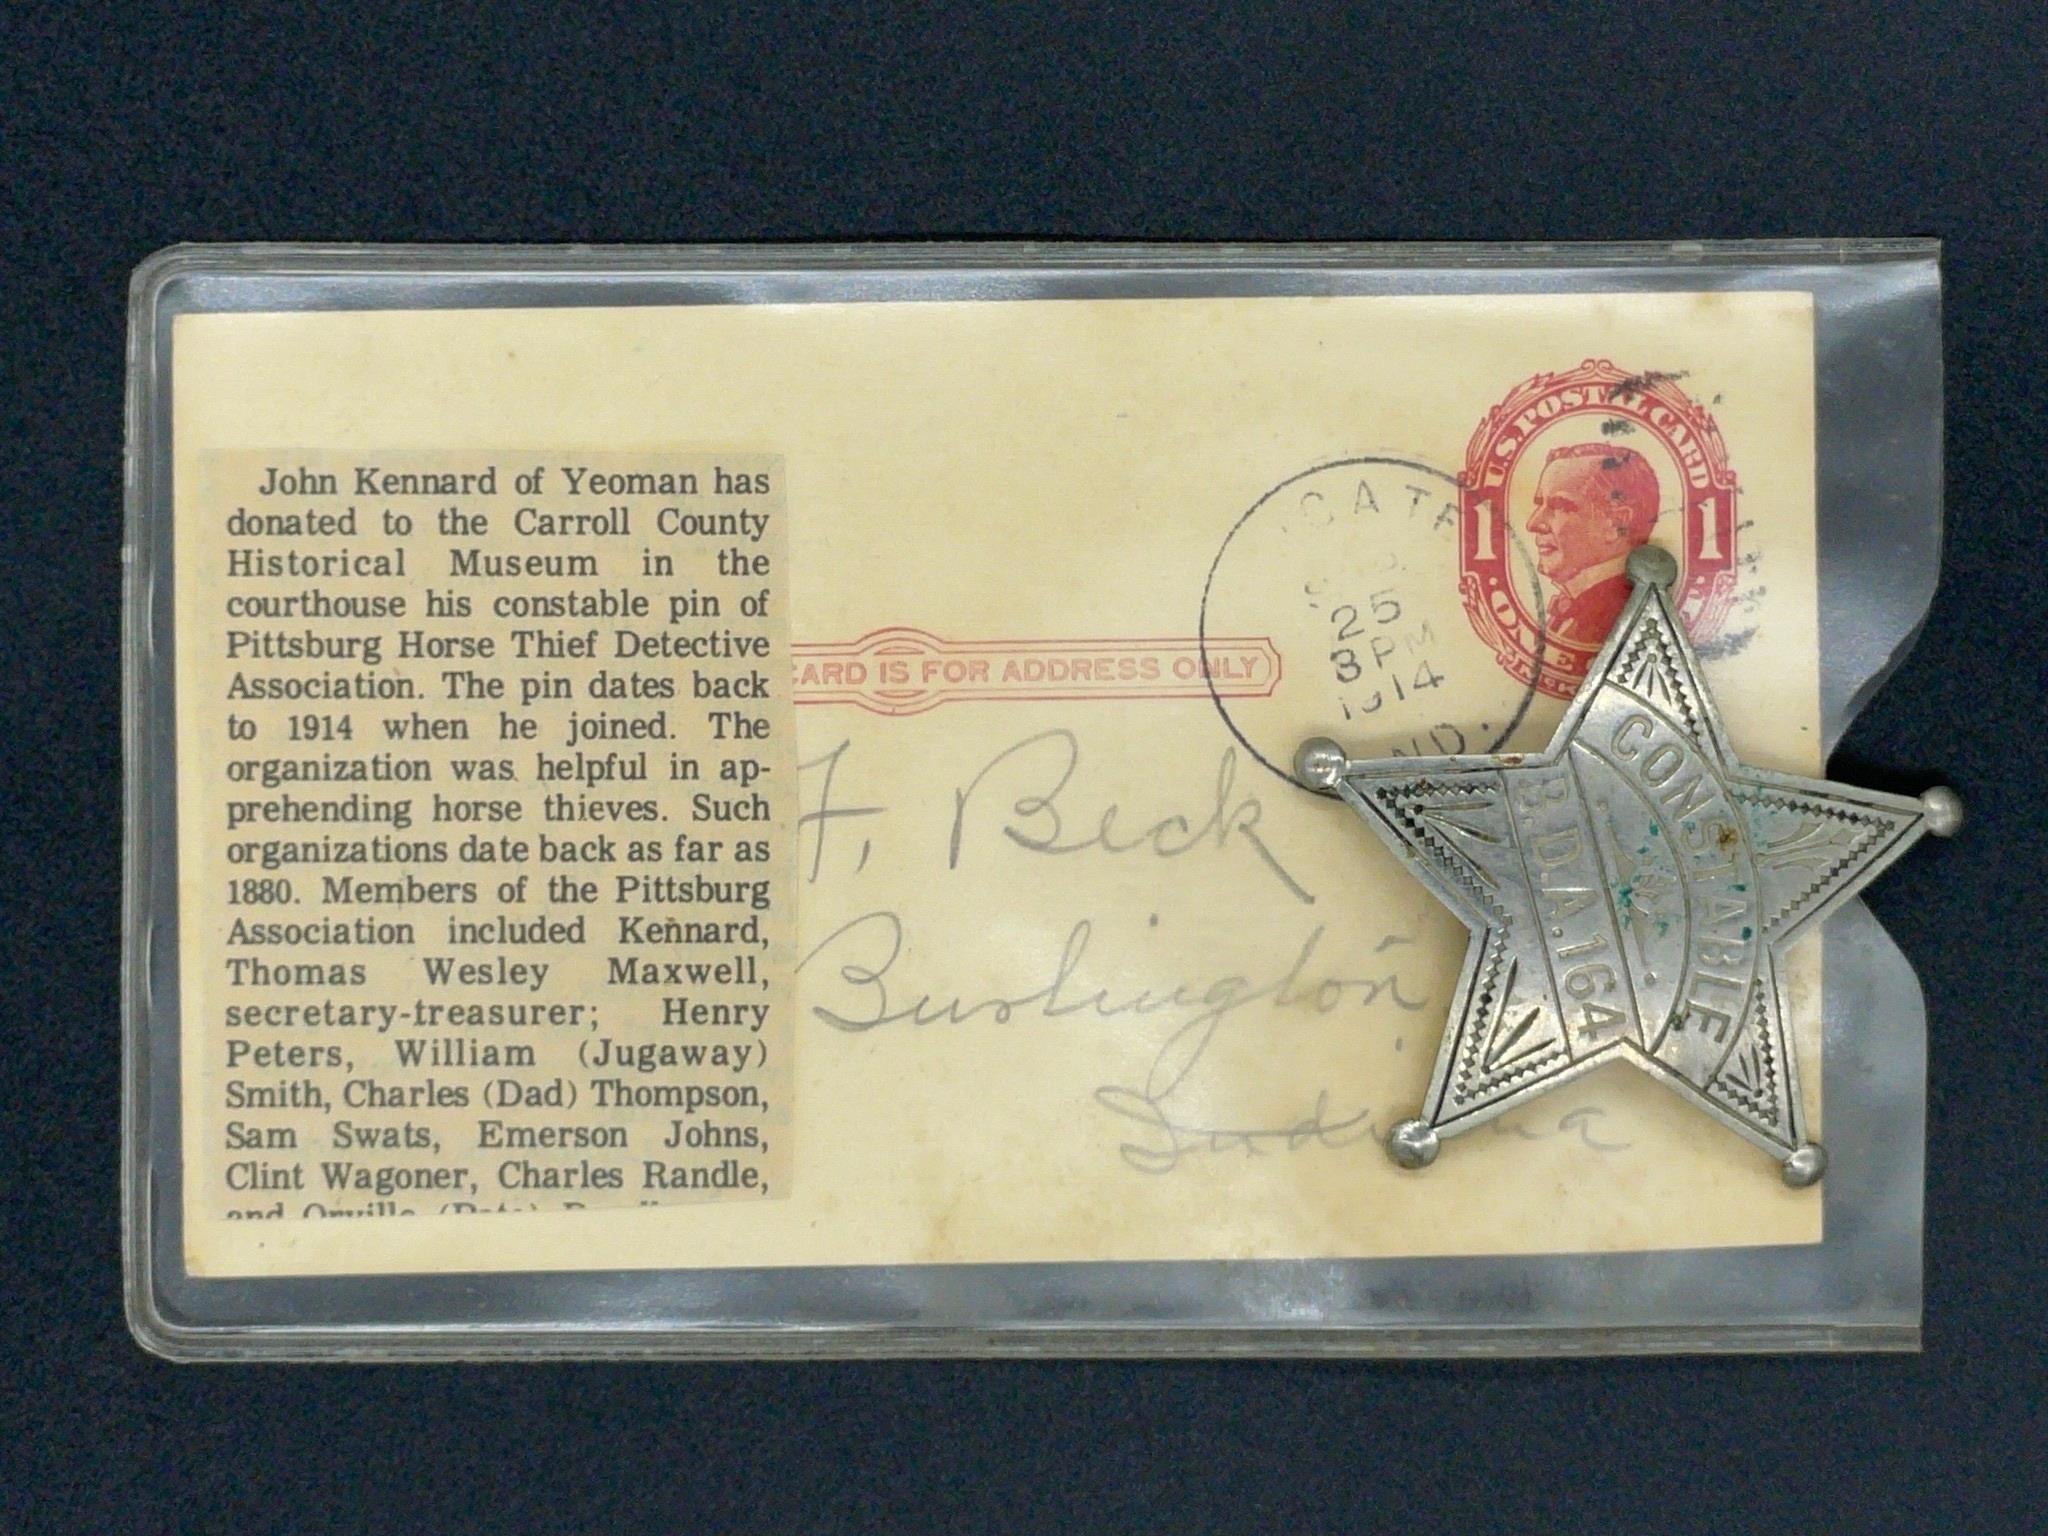 1914 postal card w/ Constable 5-point star badge